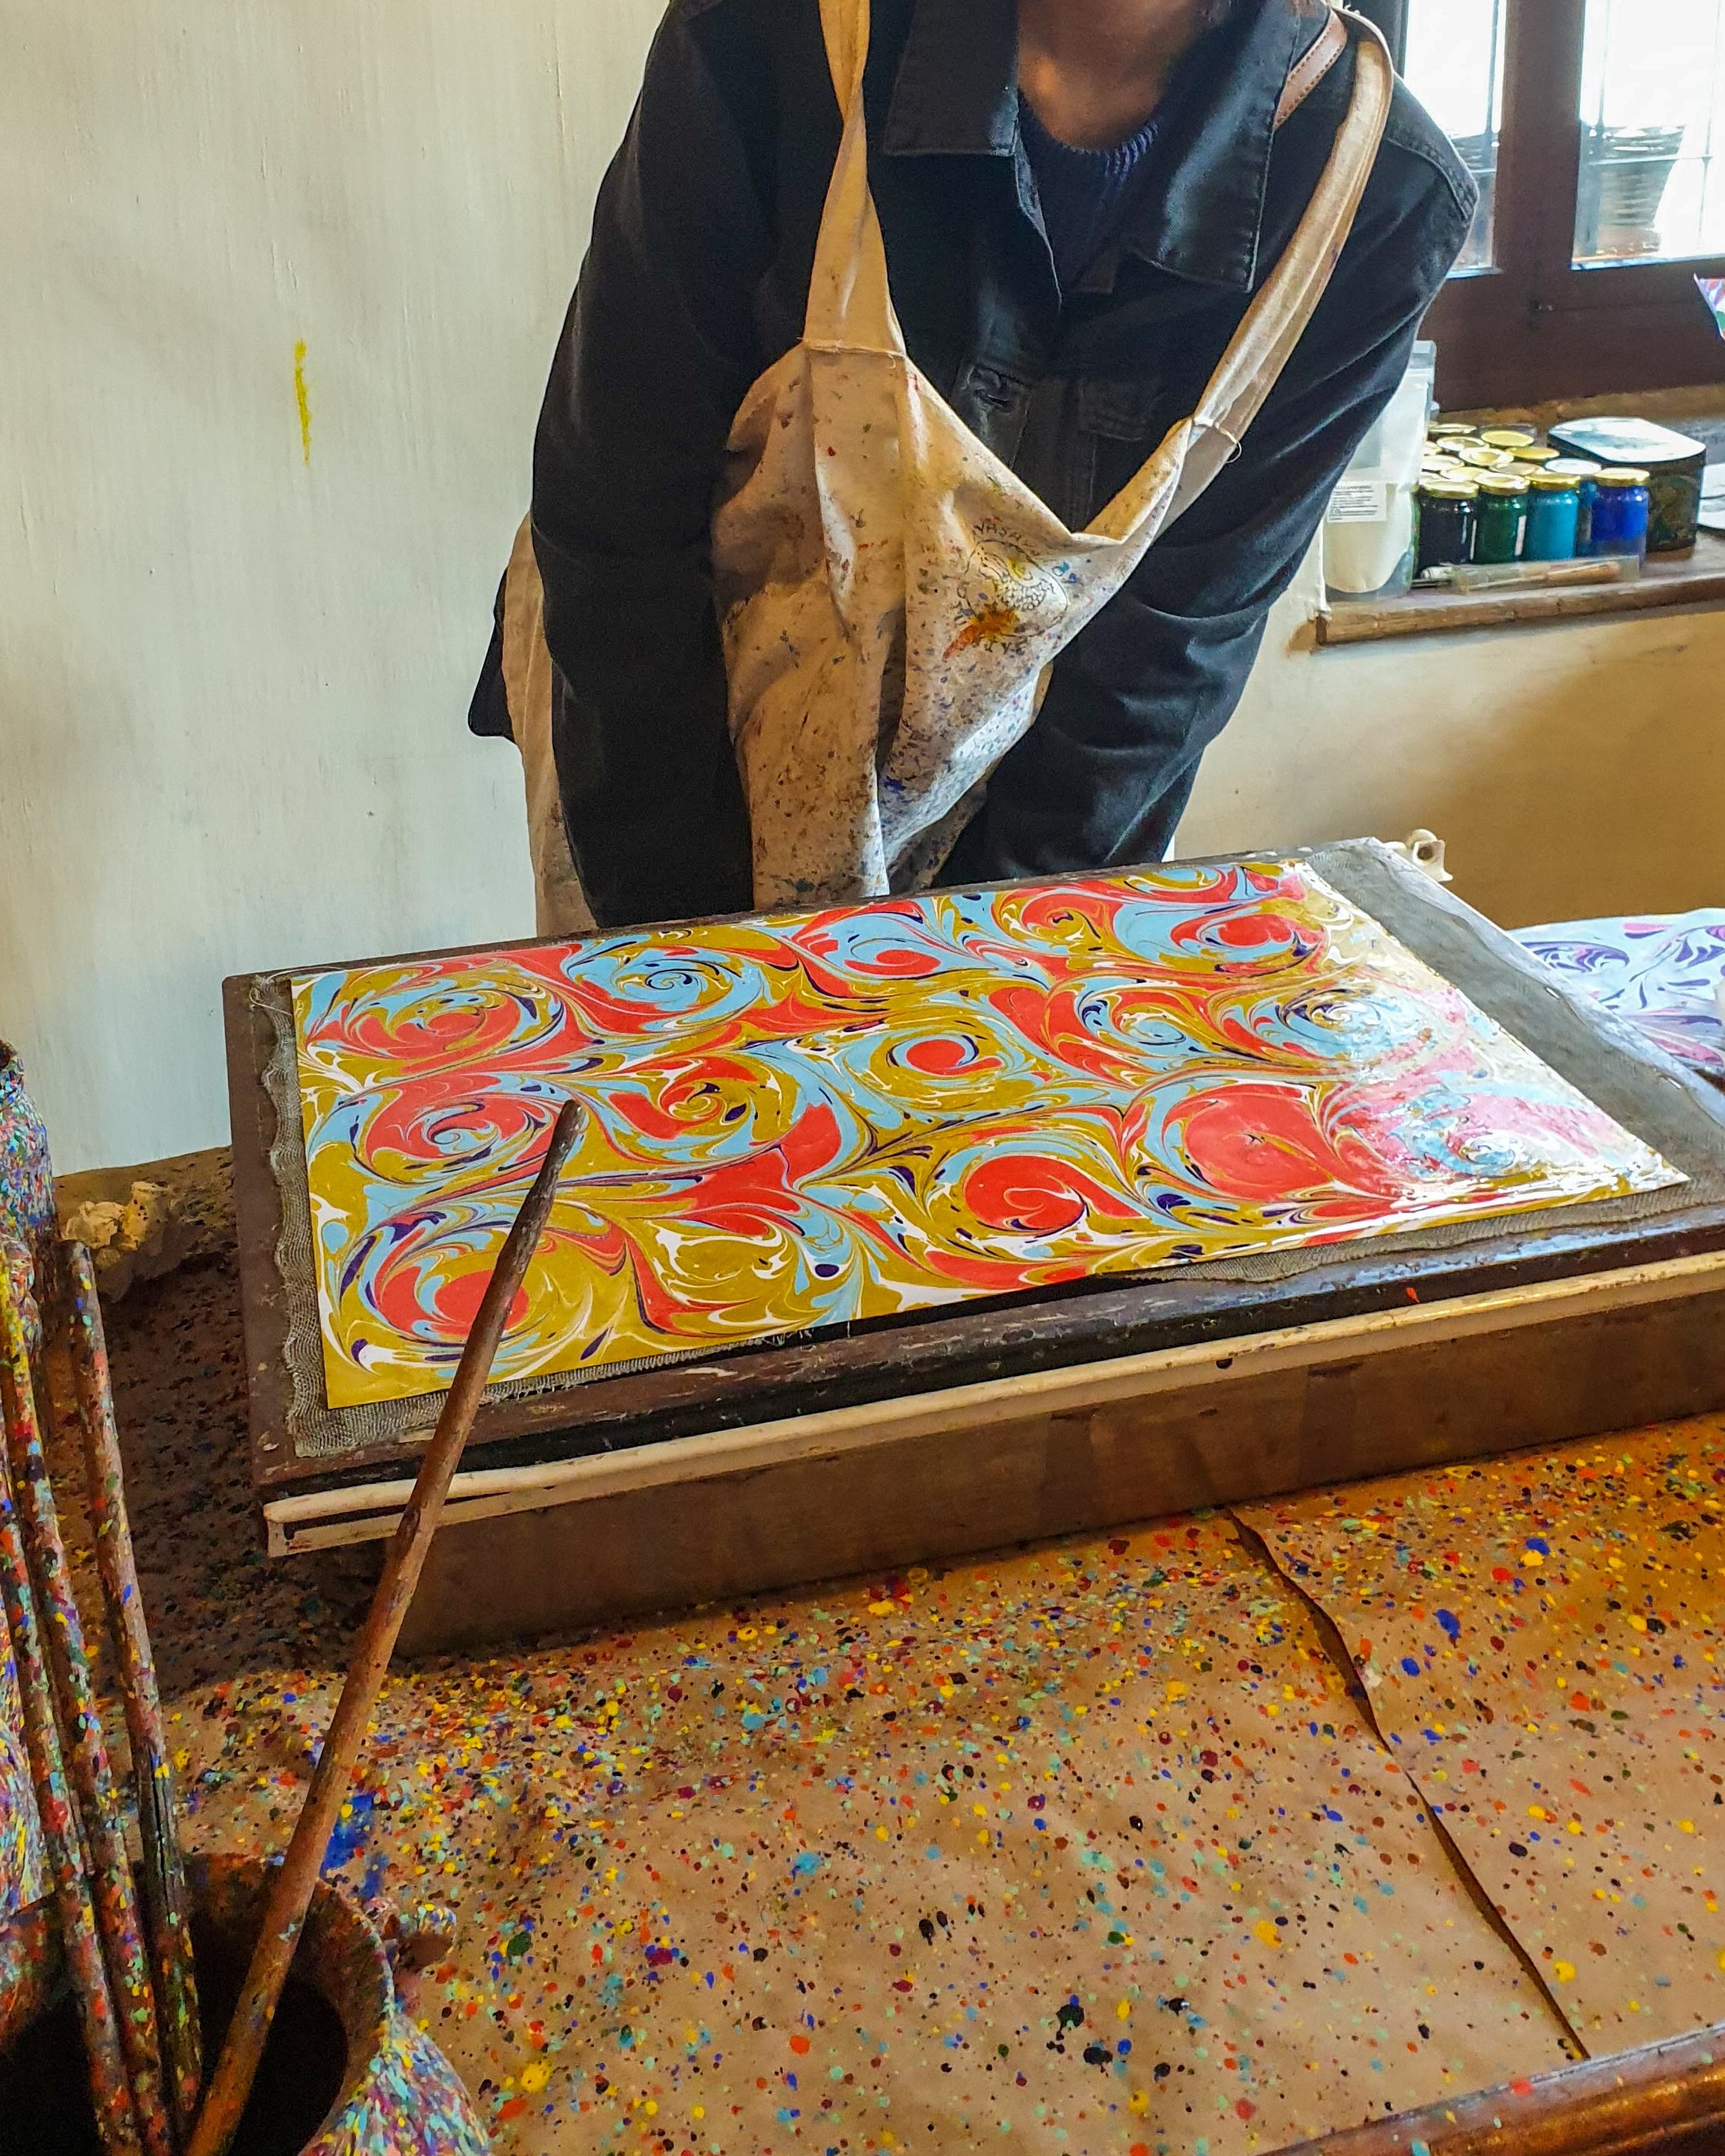 A visitor has a go at making ebru, the traditional Turkish marbling art. (Photo by Argun Konuk)